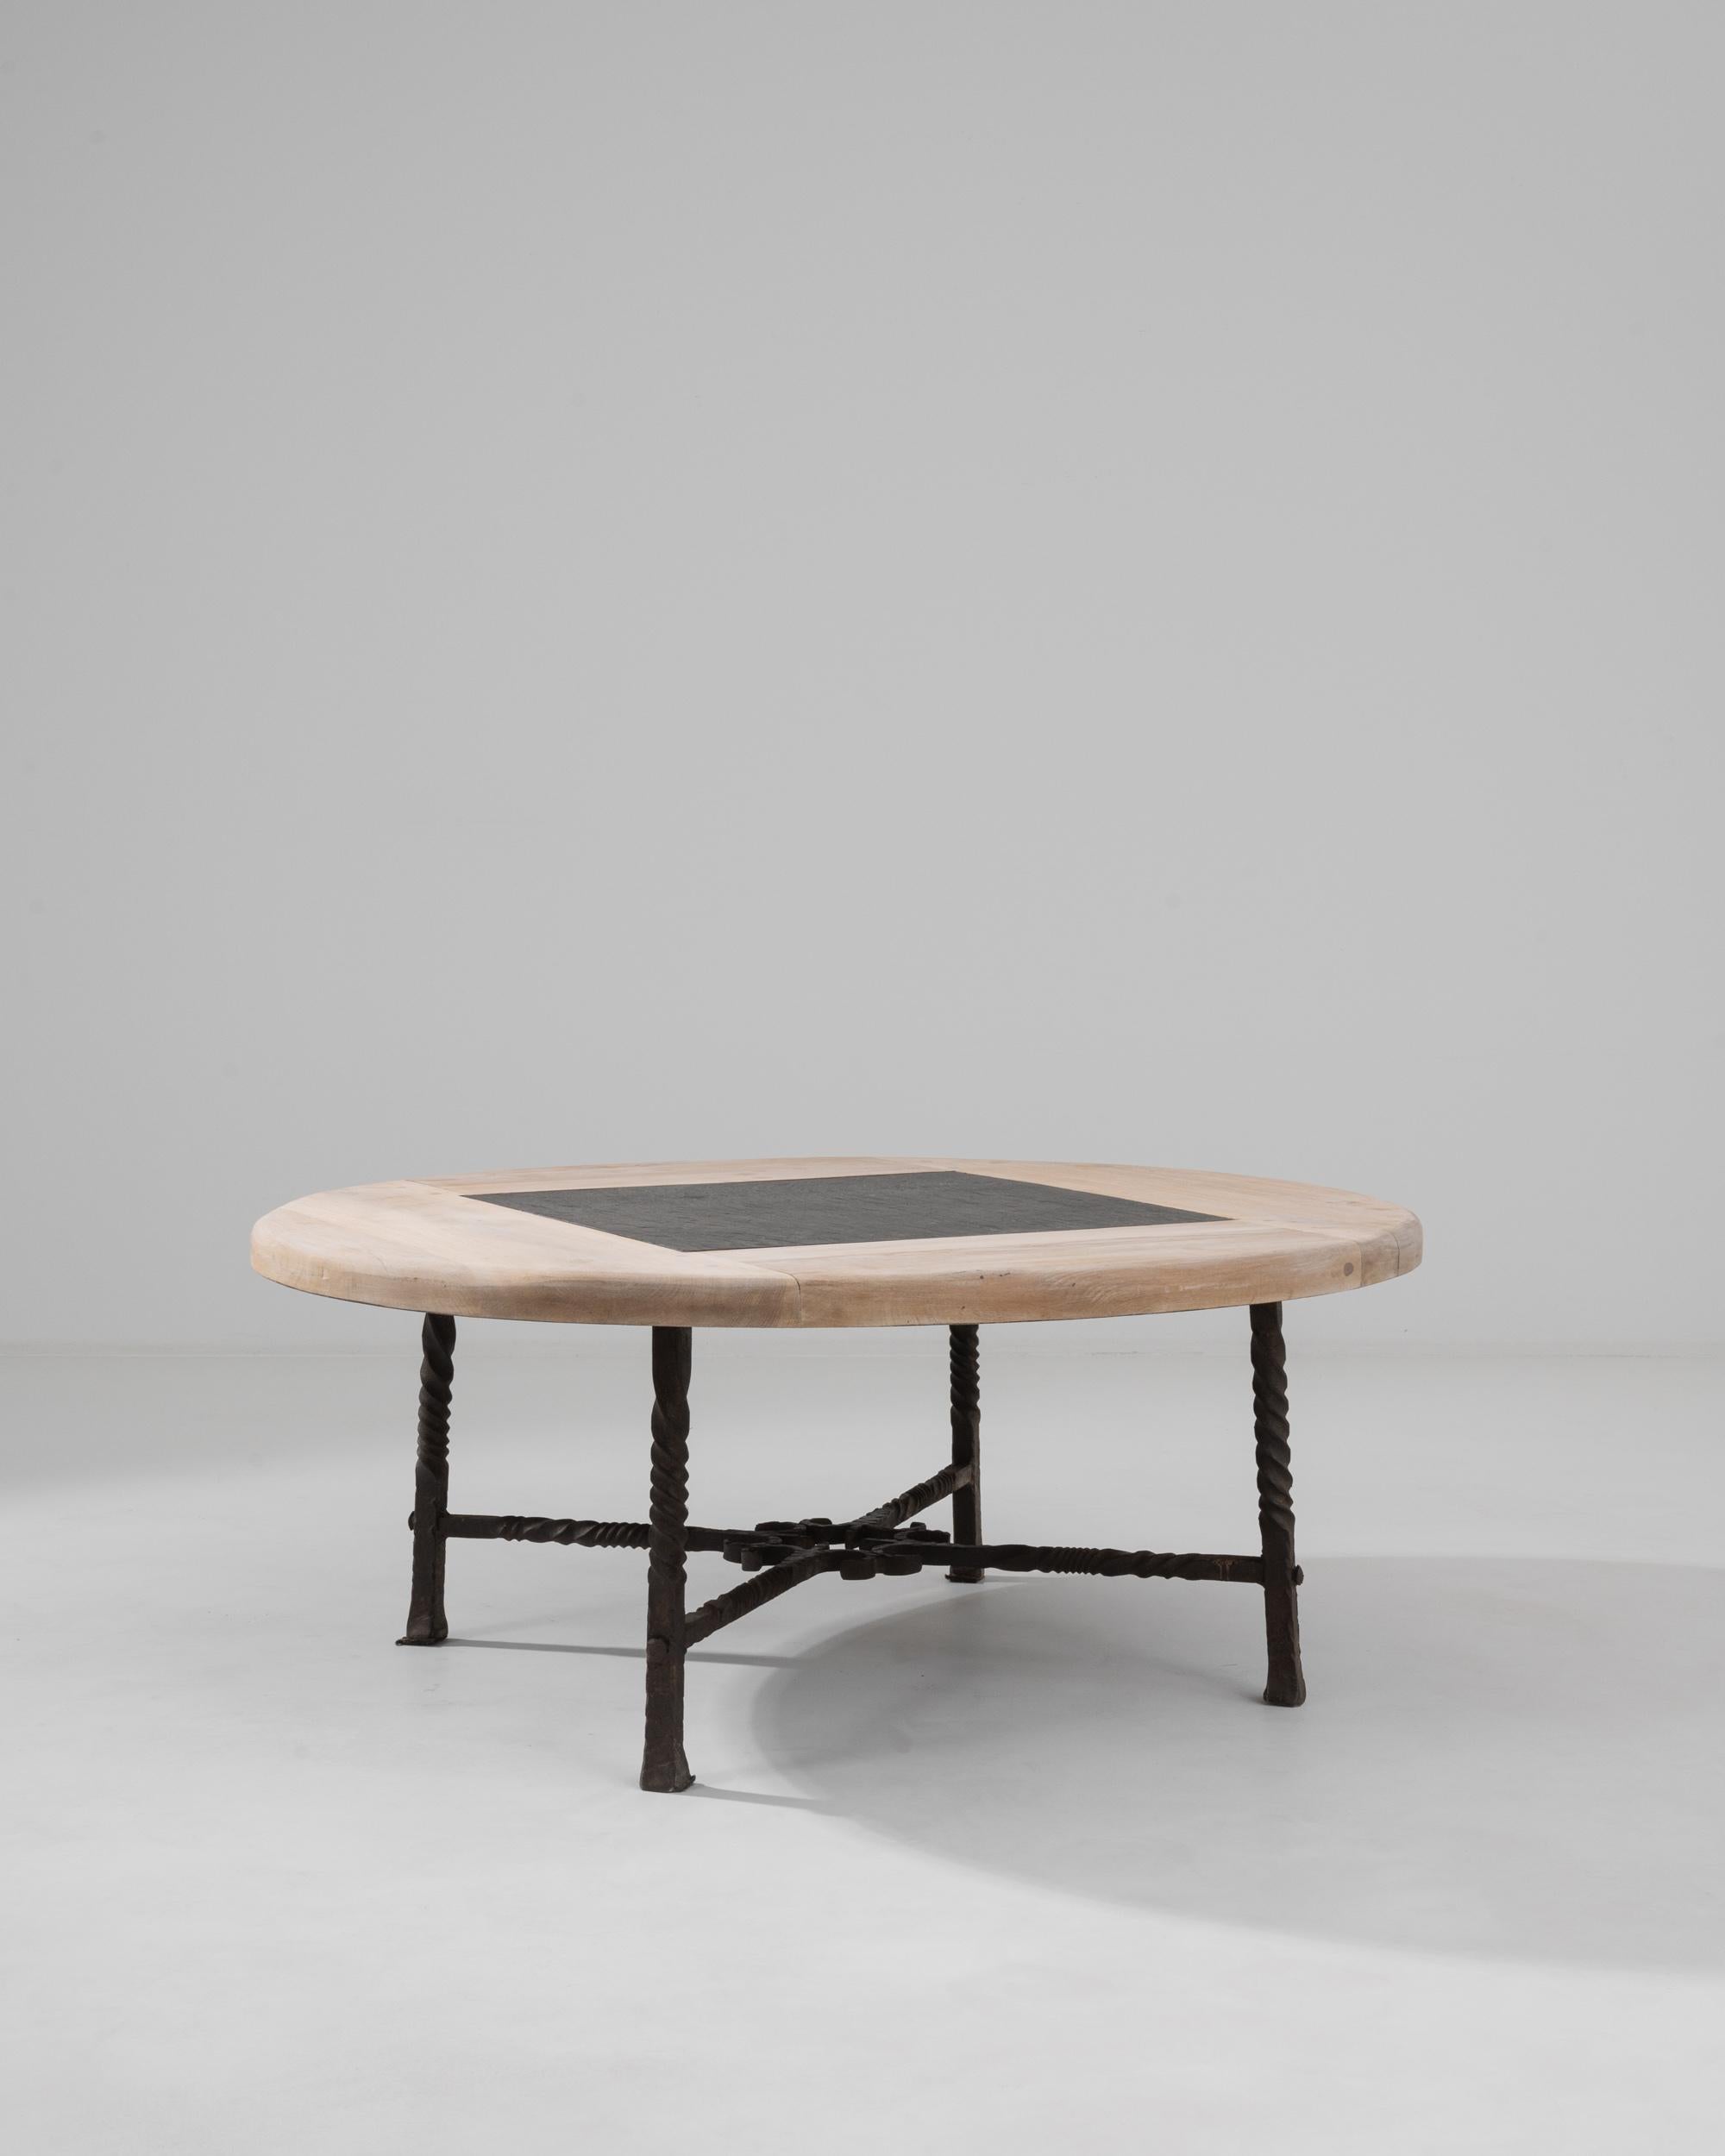 A bleached oak coffee table with an inset stone top produced in France in the 1960s. This low table is designed in a rustic vein of the mid-century modern, the simple round shape is paired with elemental textures of oak, wrought iron and stone. The